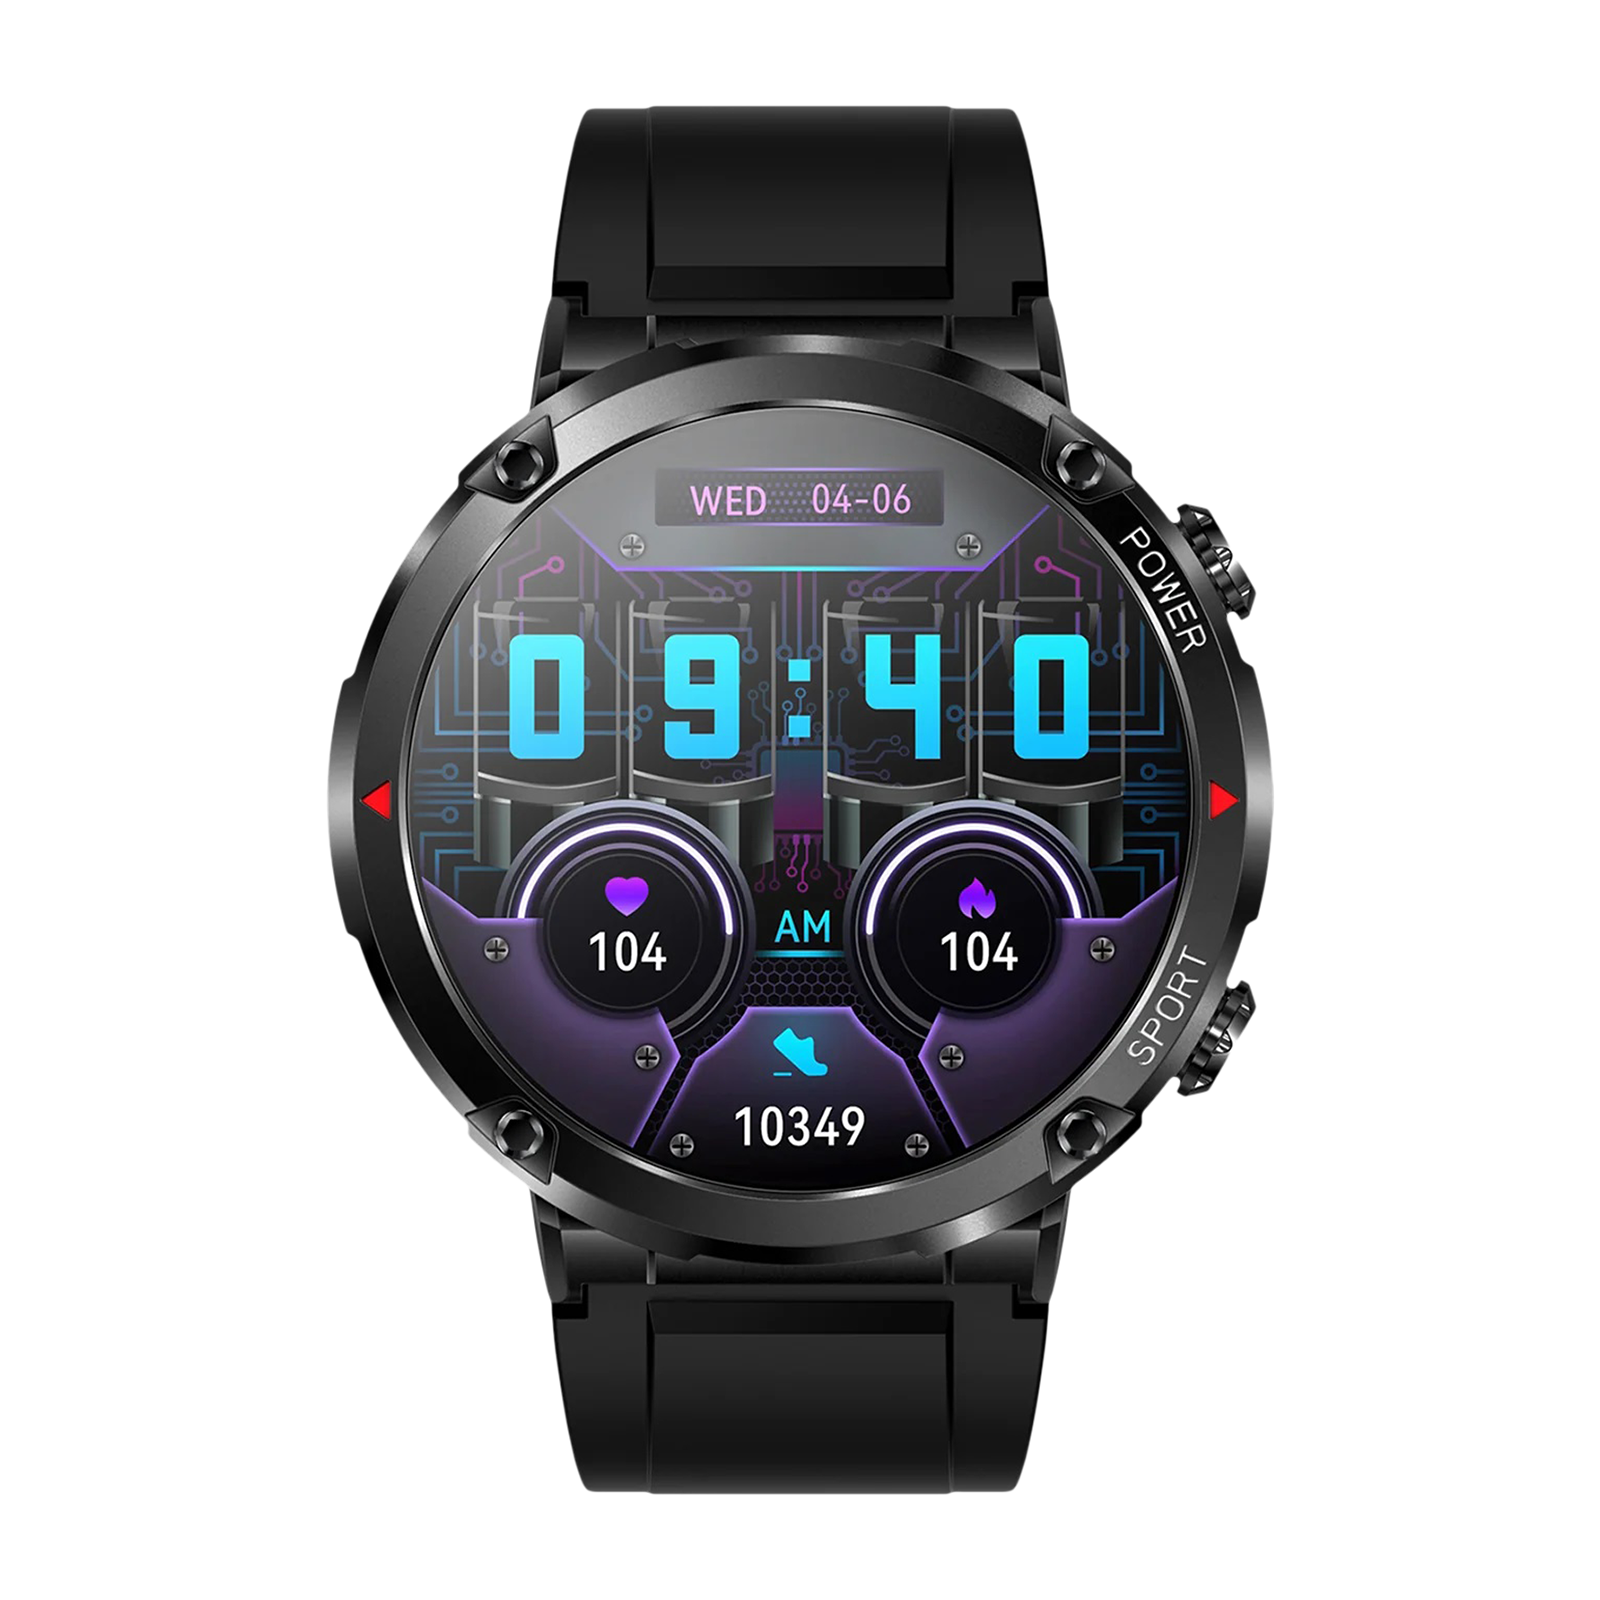 FIRE-BOLTT Sphere Smartwatch with Bluetooth Calling (40.6mm HD Display, IP68 Water Resistant, Black Strap)